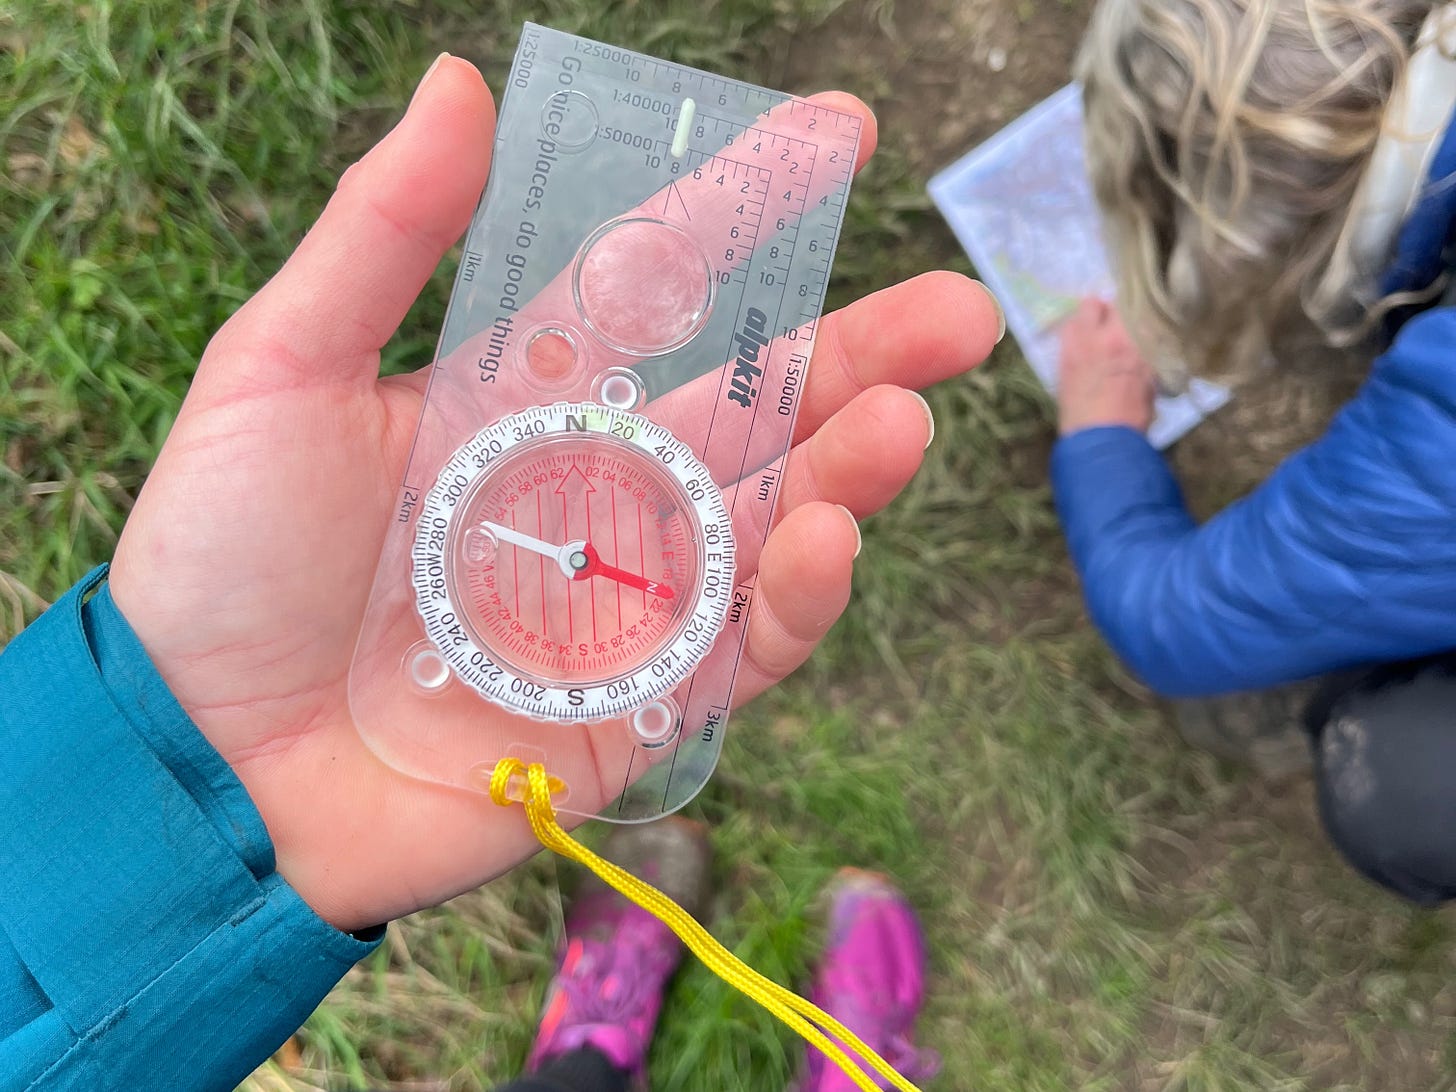 Literal tools of navigation, compasses and maps help ground you and yet if you don’t know how to use them, they’re totally pointless! This is a recent navigation and map reading course to help put into practice some theoretical knowledge.